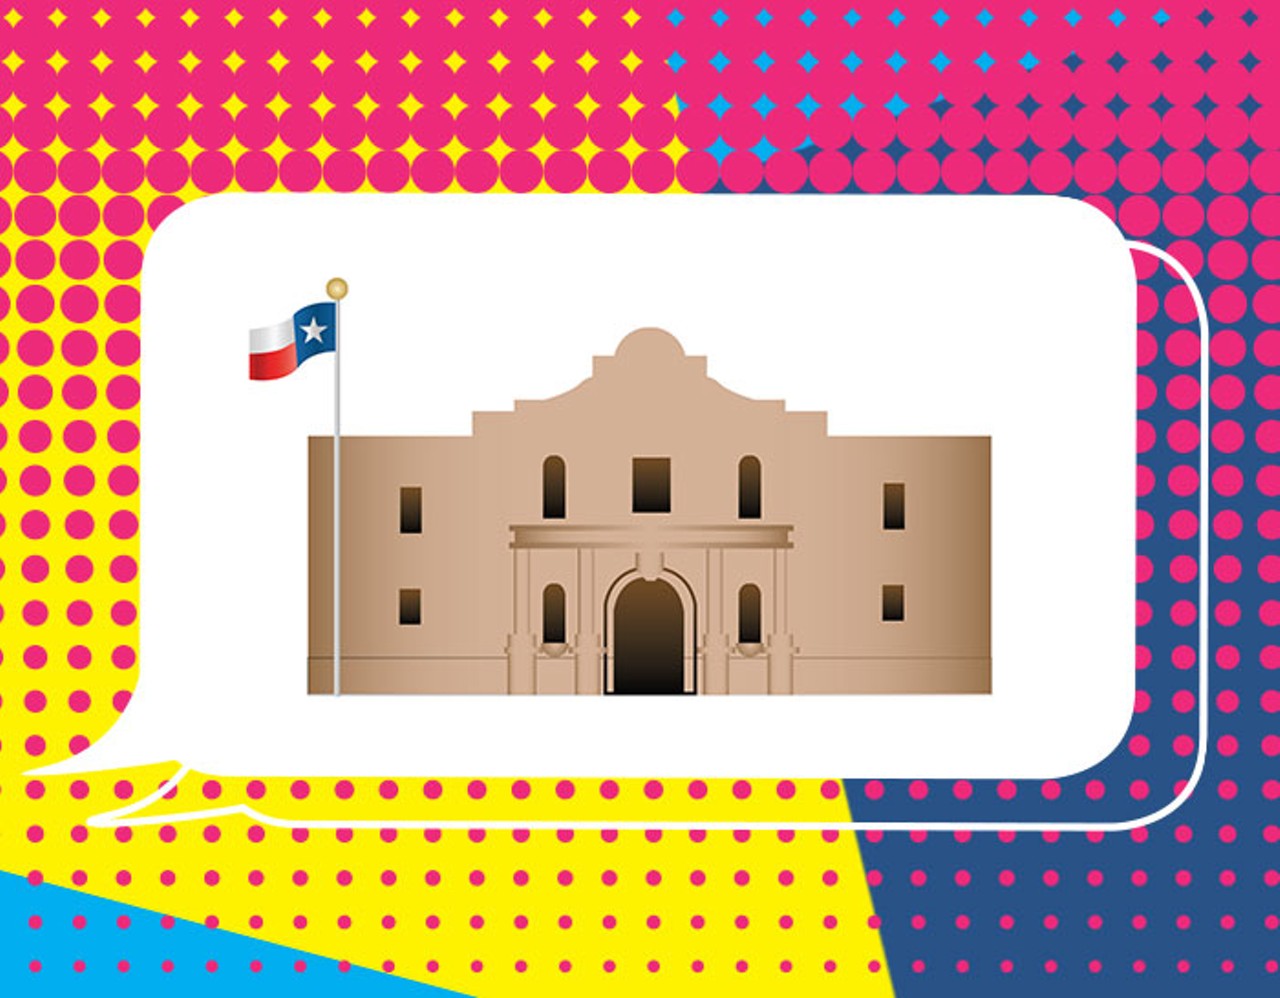 The Alamo
When to use it: We live in the Alamo City &#151; use it whenever you want. There is no inappropriate time for the Alamo emoji; the question is only how many Alamo emojis to use. Spurs win? Alamo emoji. Your car breaks down? Alamo emoji. Wanna get tacos? Alamo emoji. Ironically, since you probably only go to the Alamo when you have family visiting from out of town, you&#146;re least likely to use the Alamo emoji when you&#146;re actually visiting the Alamo. But it&#146;s OK to use then, too.